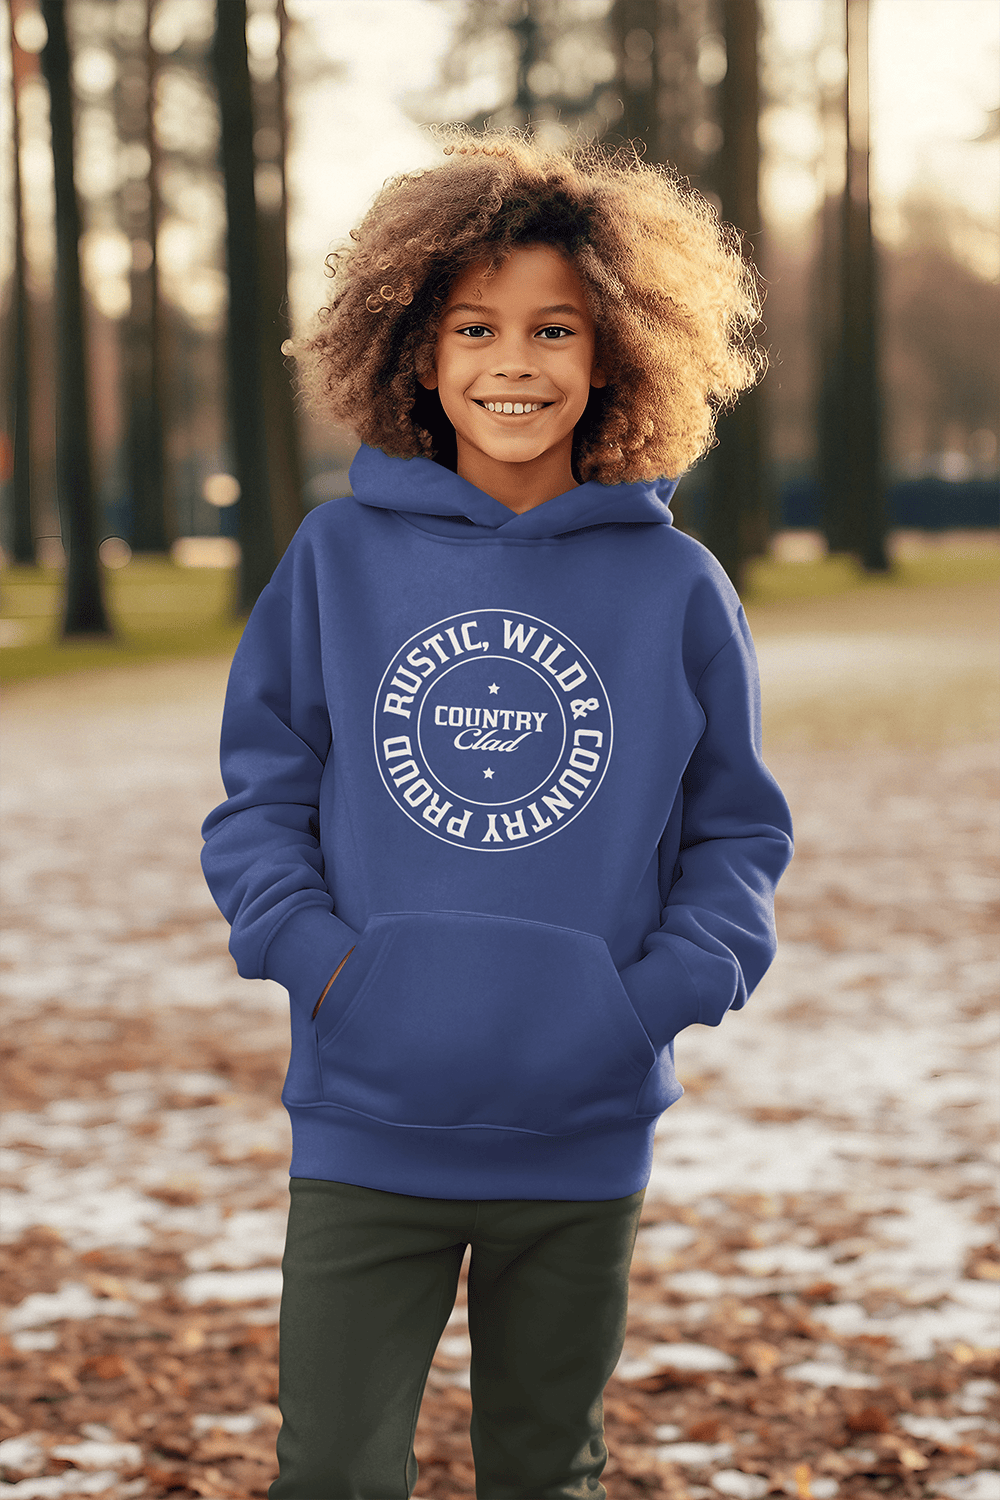 ai-created-mockup-of-a-smiling-boy-wearing-a-pullover-hoodie-in-a-winter-landscape-m36240-1-1